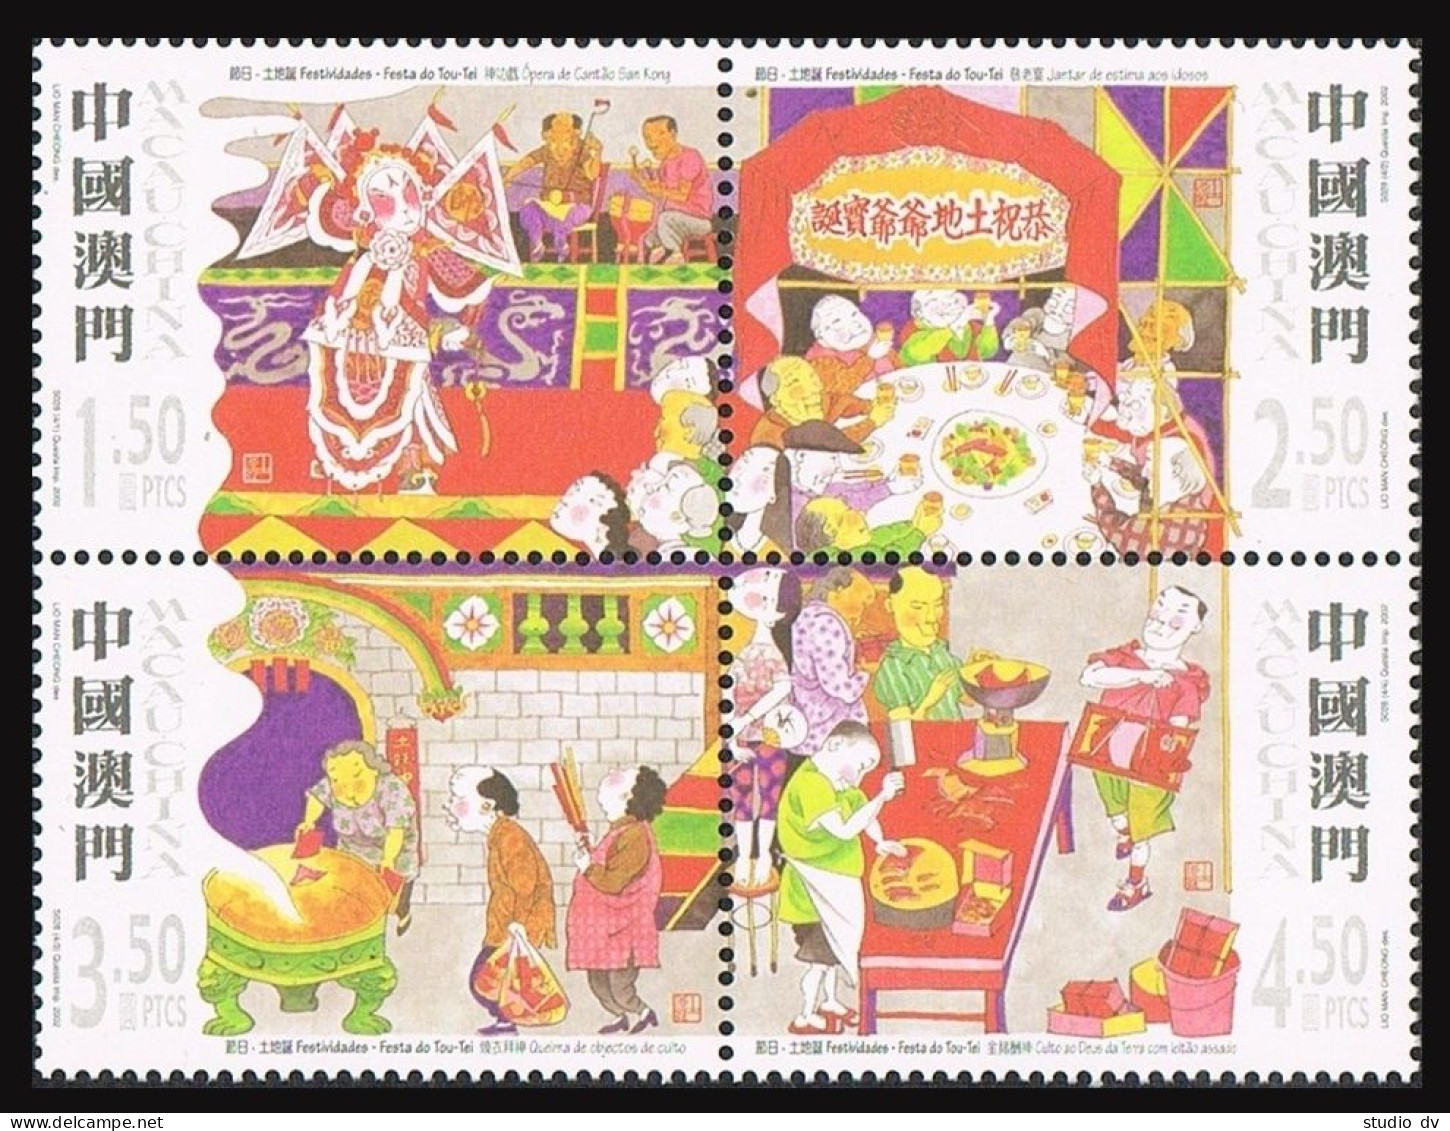 Macao 1086 Af Block,MNH. Tou-tei Festival, 2002.Opera,Dinner,Religious Objects, - Ungebraucht